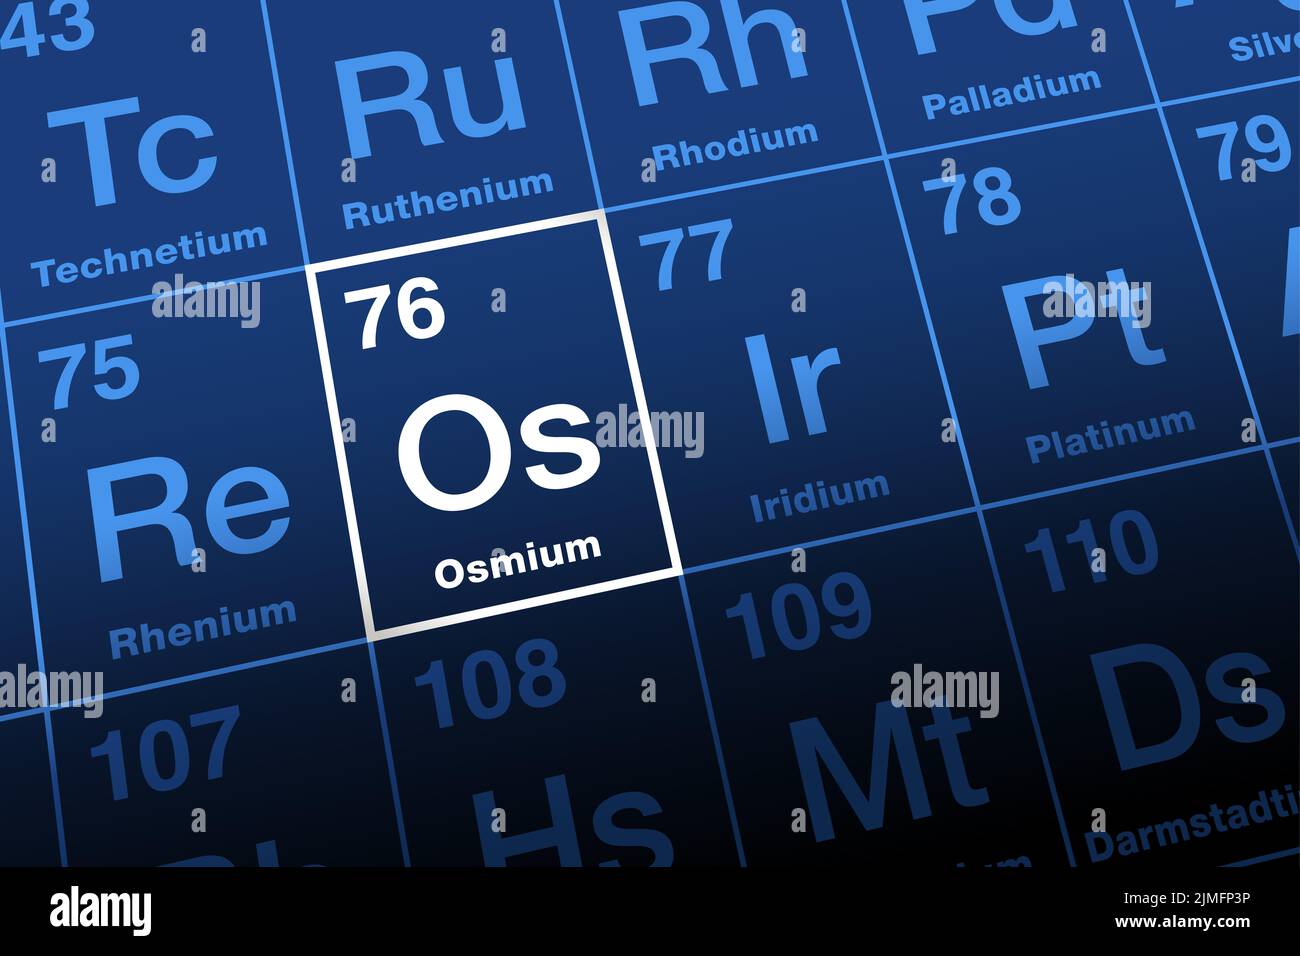 Osmium on periodic table. Transition metal, named after Greek osme, smell. Element symbol Os, atomic number 76. Densest naturally occurring element. Stock Photo